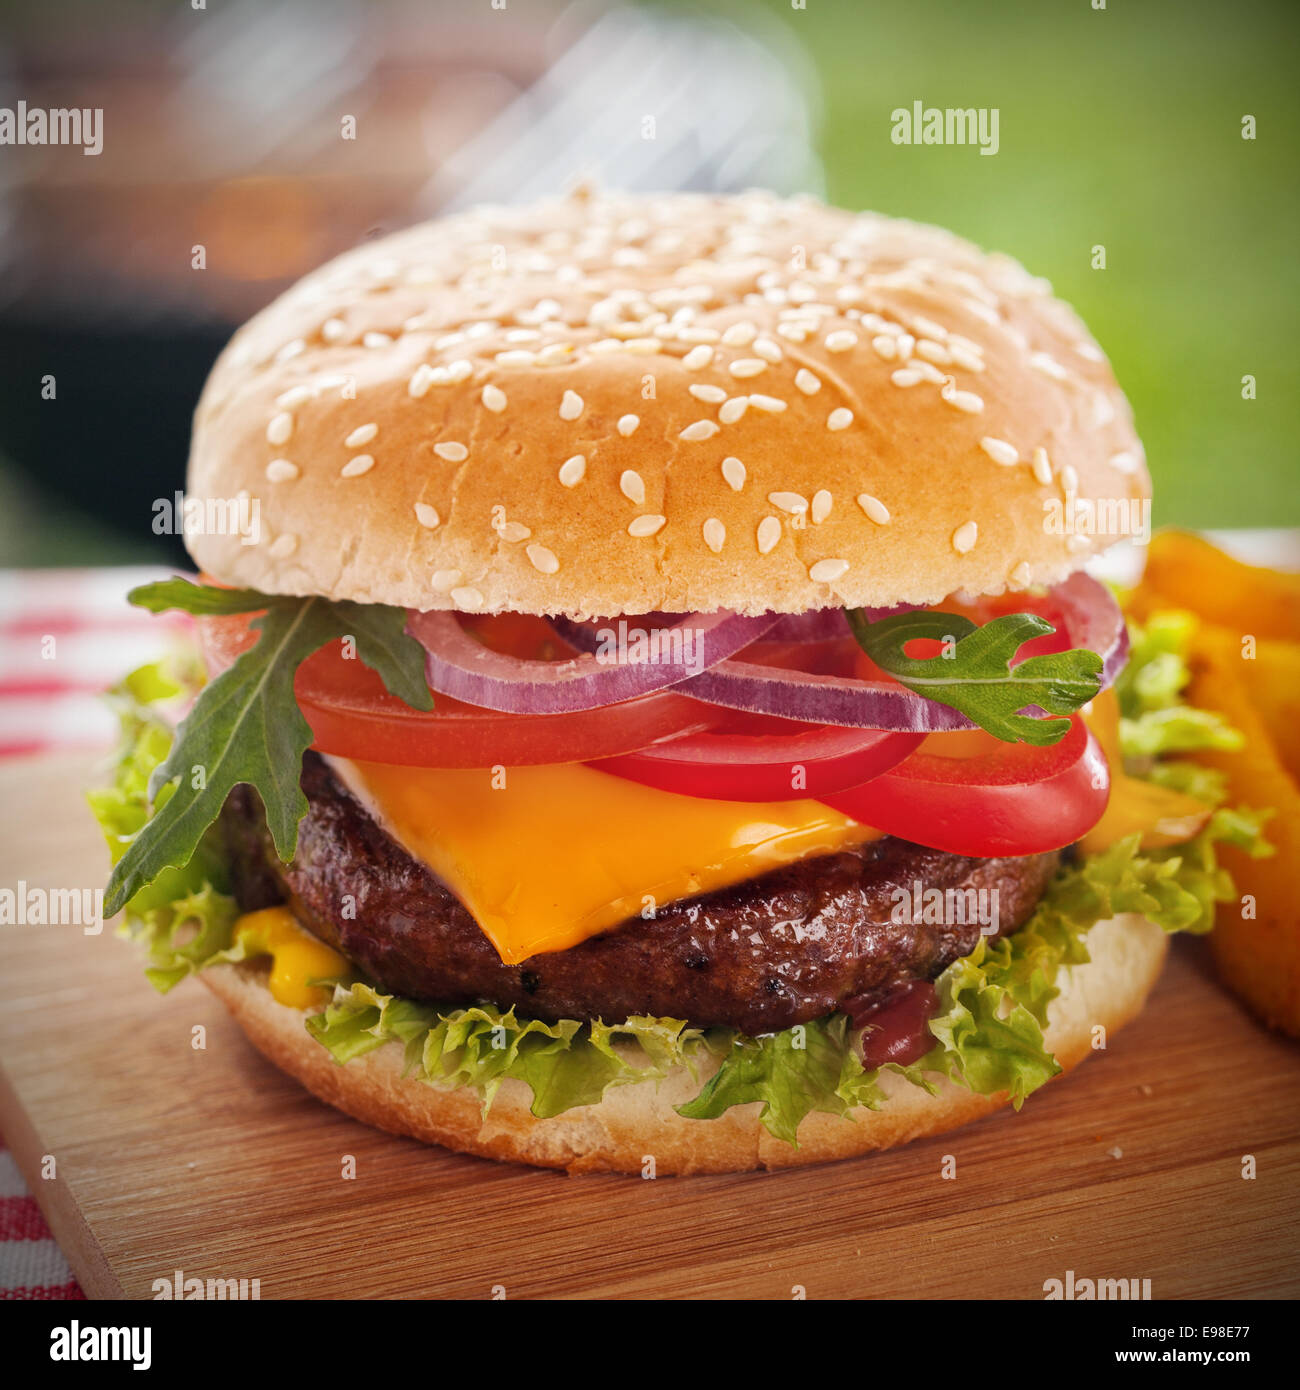 Tasty burger with melted cheese and a thick succulent ground beef patty garnished with lettuce, tomato, onion and rocket on a sesame bun standing on a picnic table in the garden Stock Photo